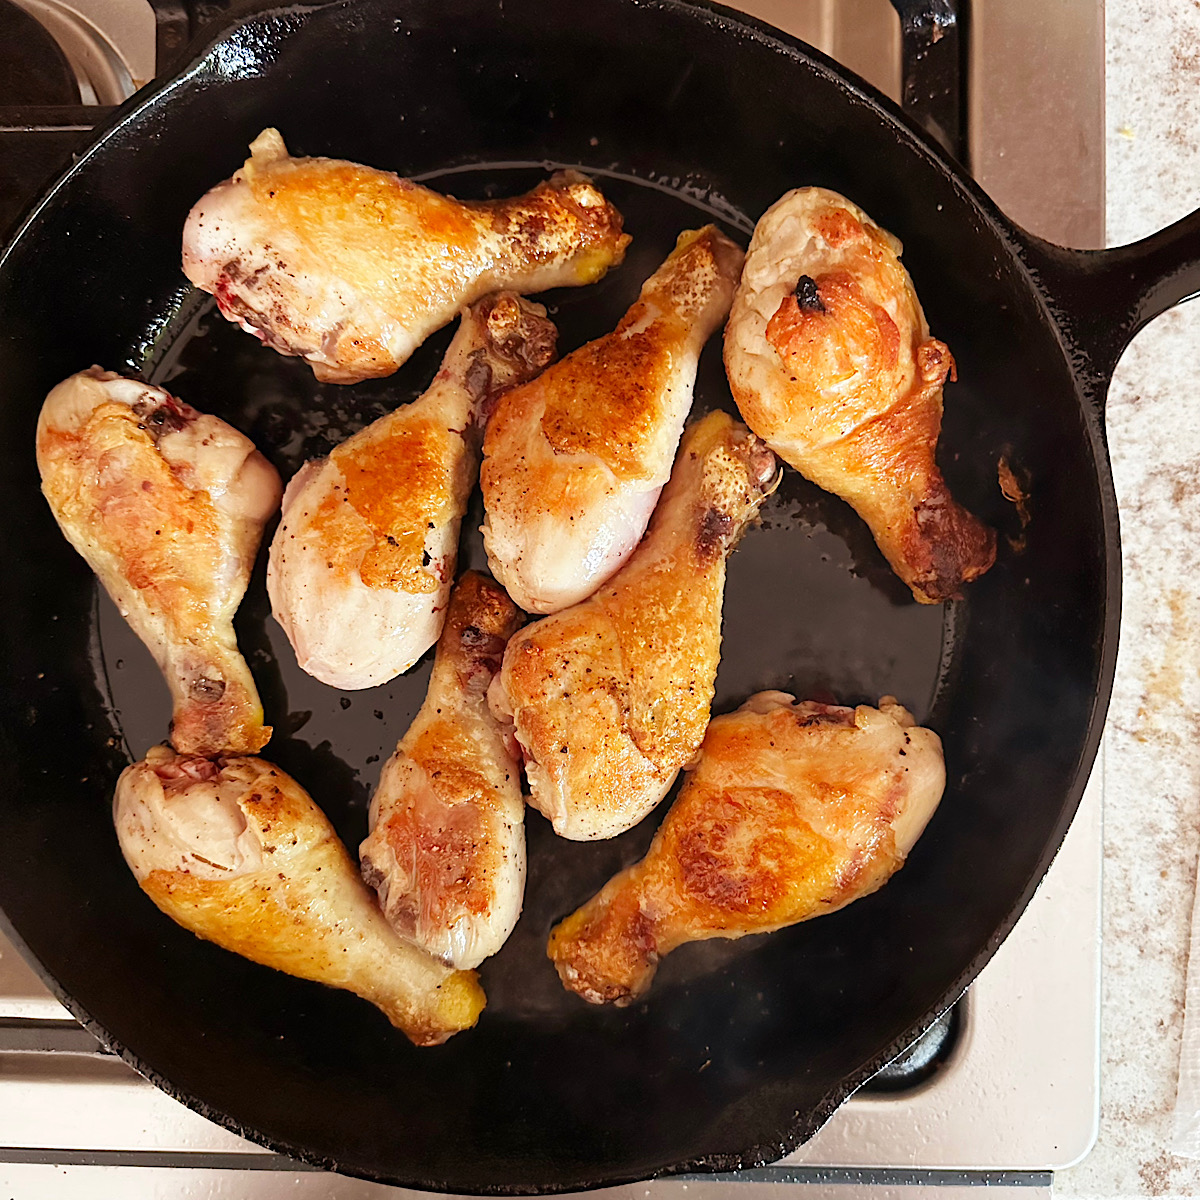 Chicken legs being browned in a cast iron skillet